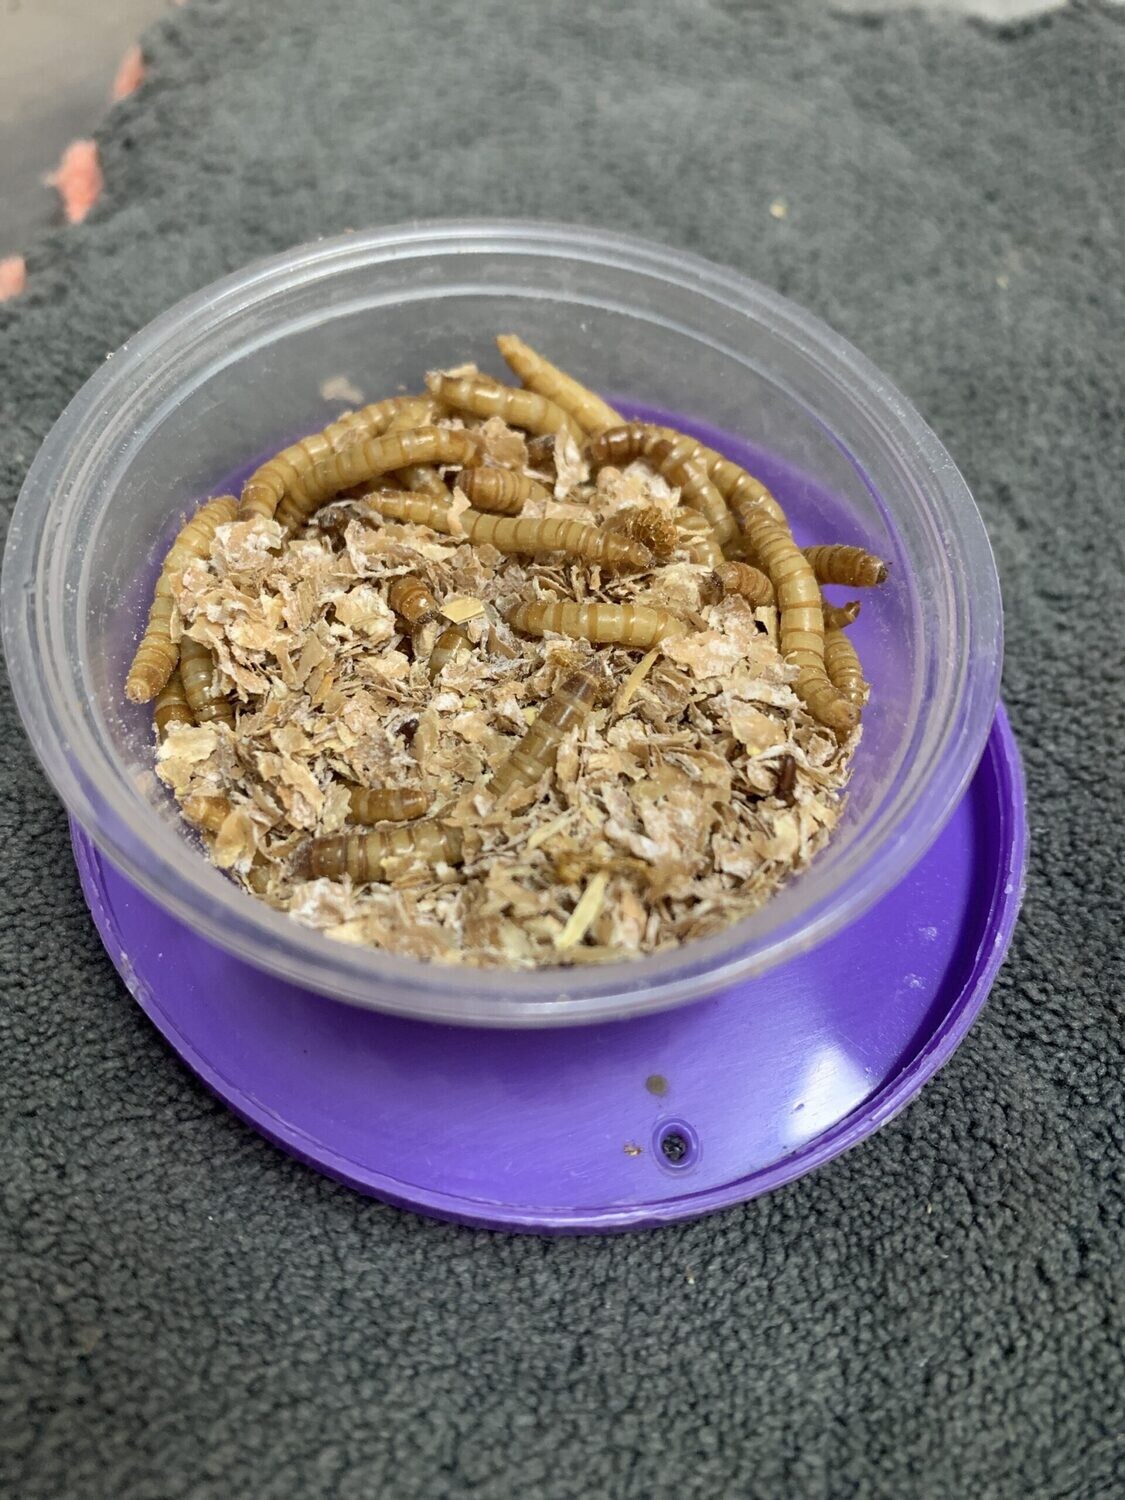 Mealworms From 100gr